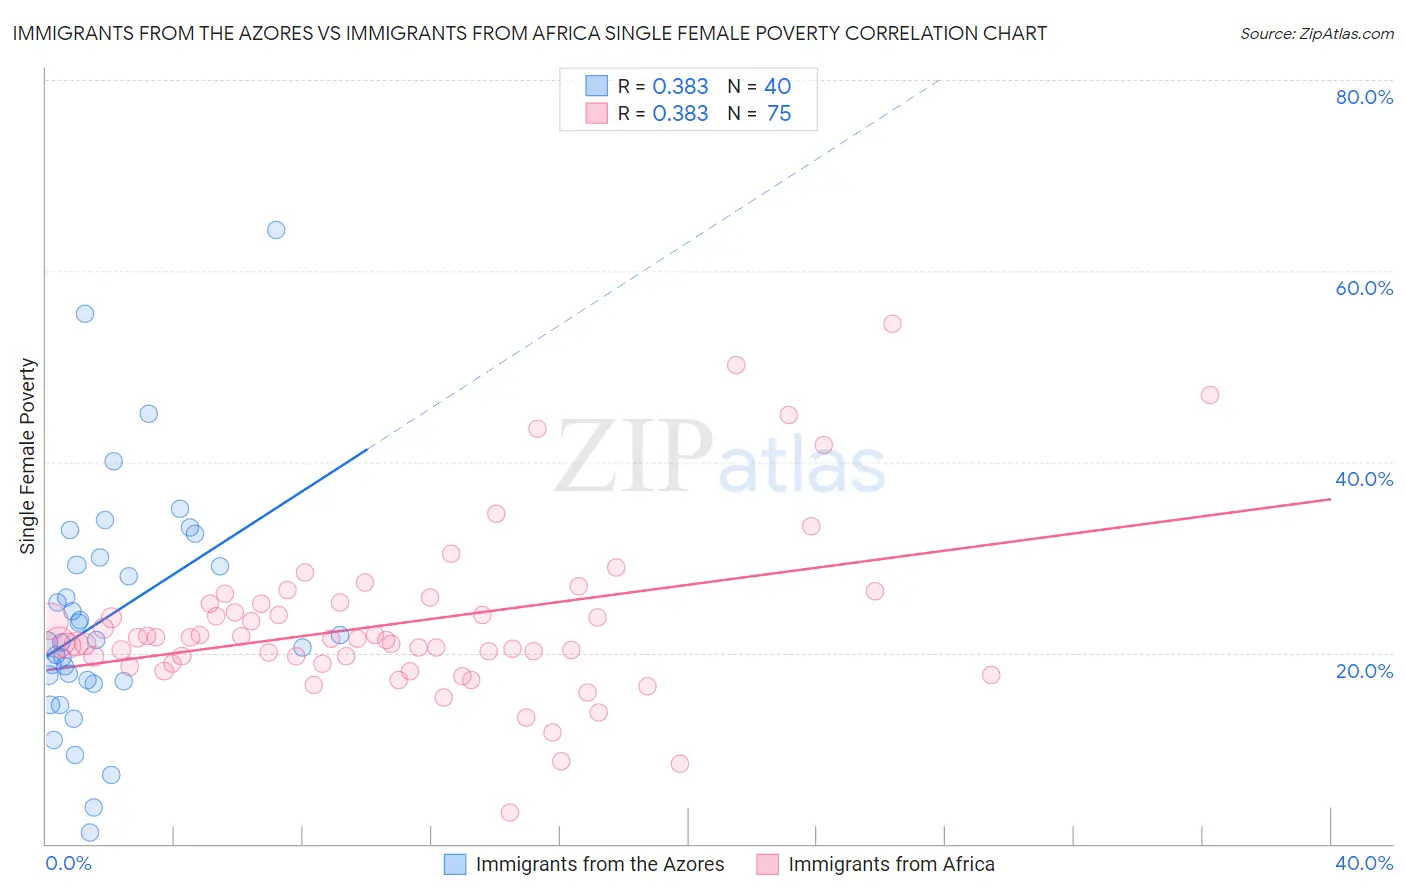 Immigrants from the Azores vs Immigrants from Africa Single Female Poverty